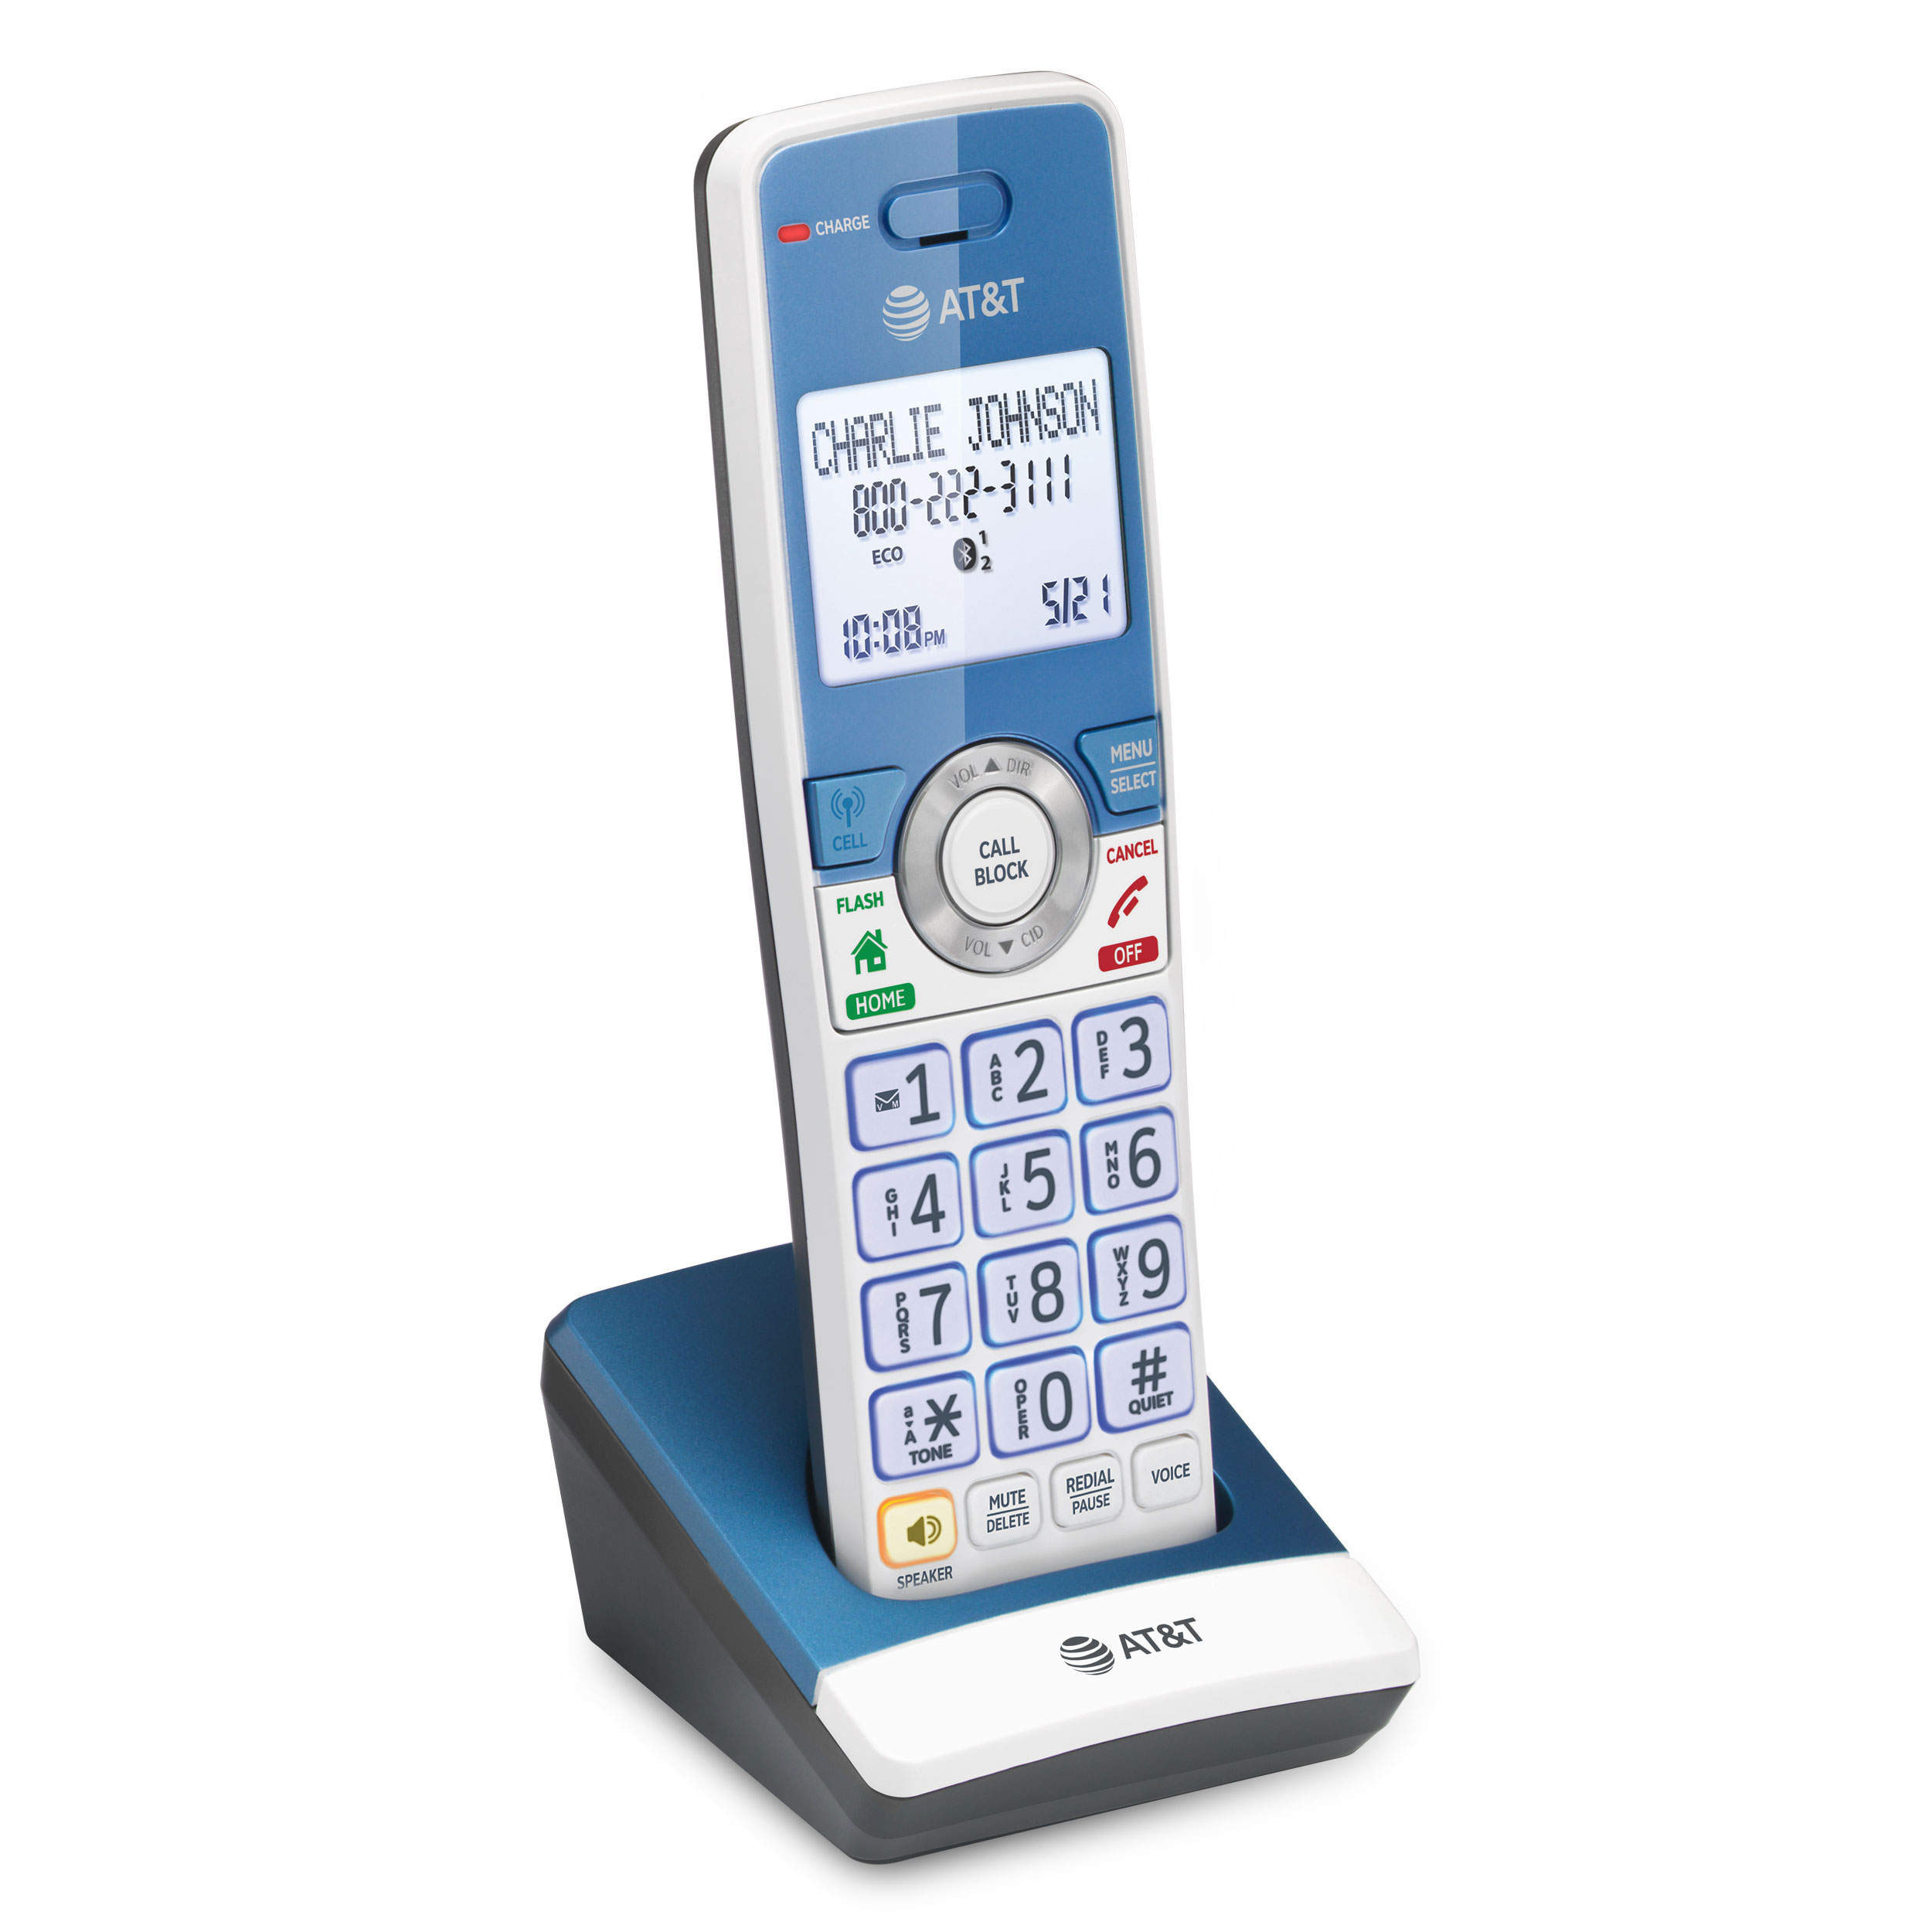 Accessory Handset with Unsurpassed Range, Bluetooth Connect to Cell, and Smart Call Blocker (Blue) - view 2